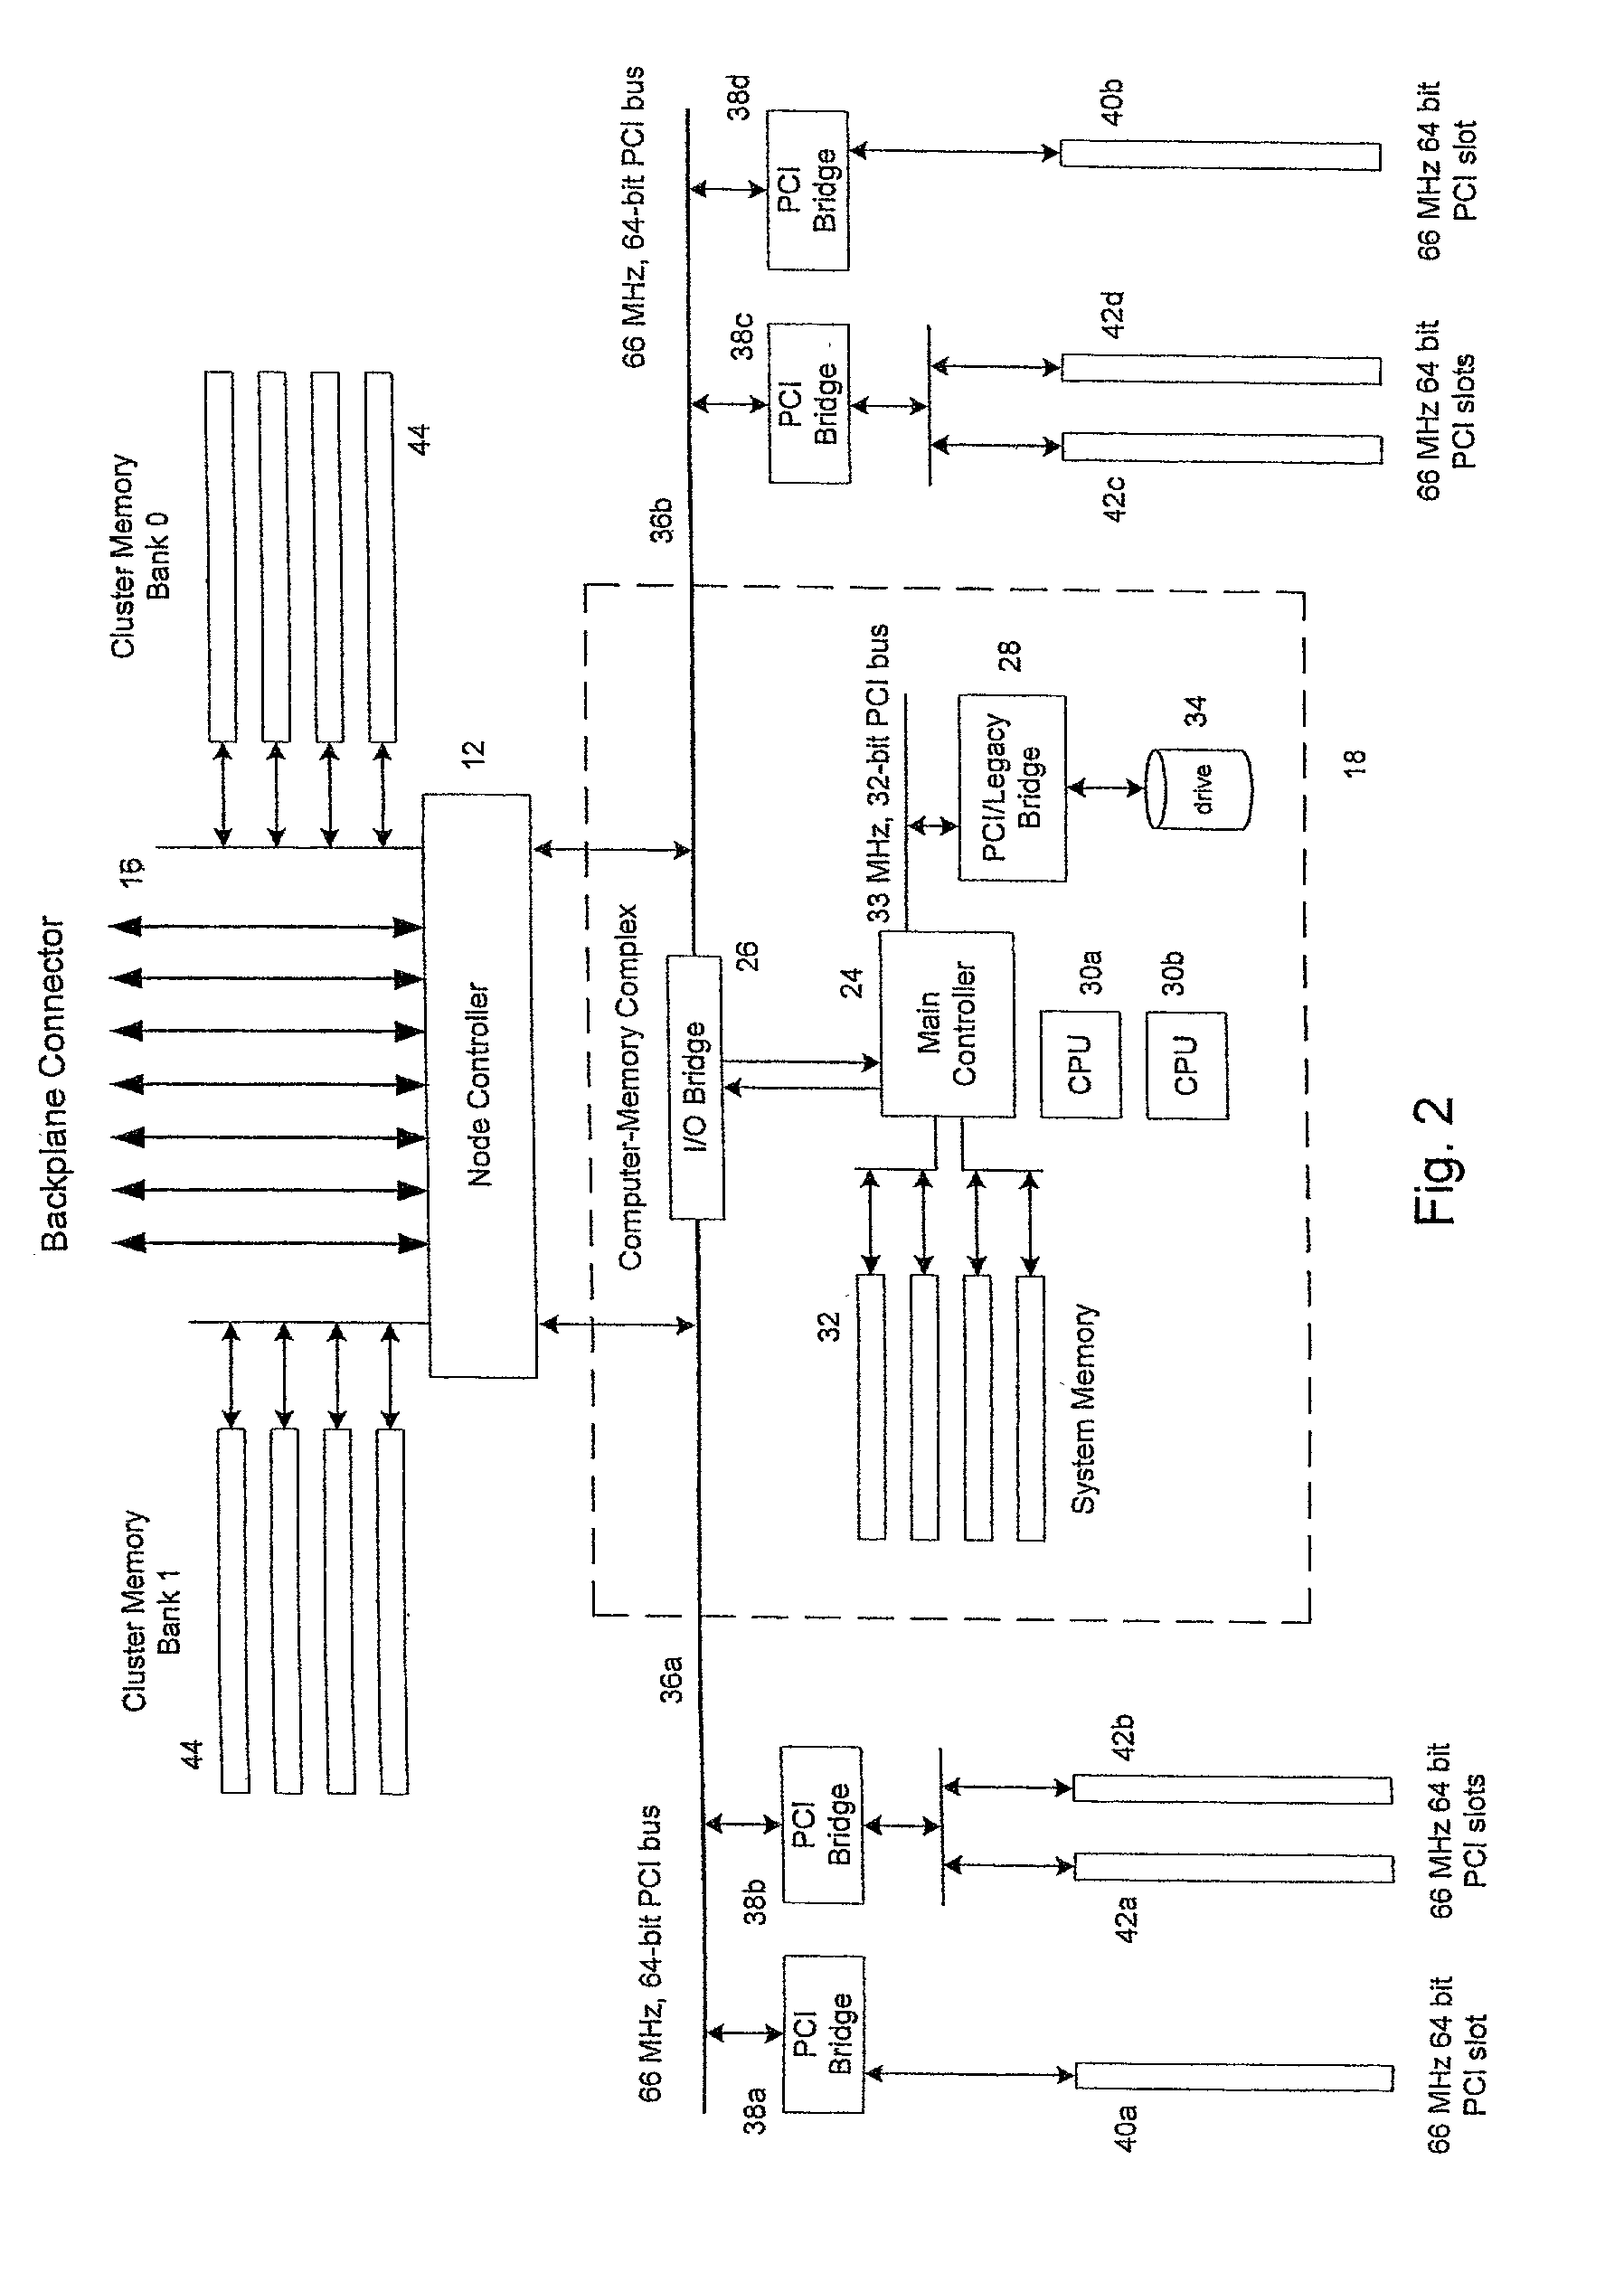 Node controller for a data storage system